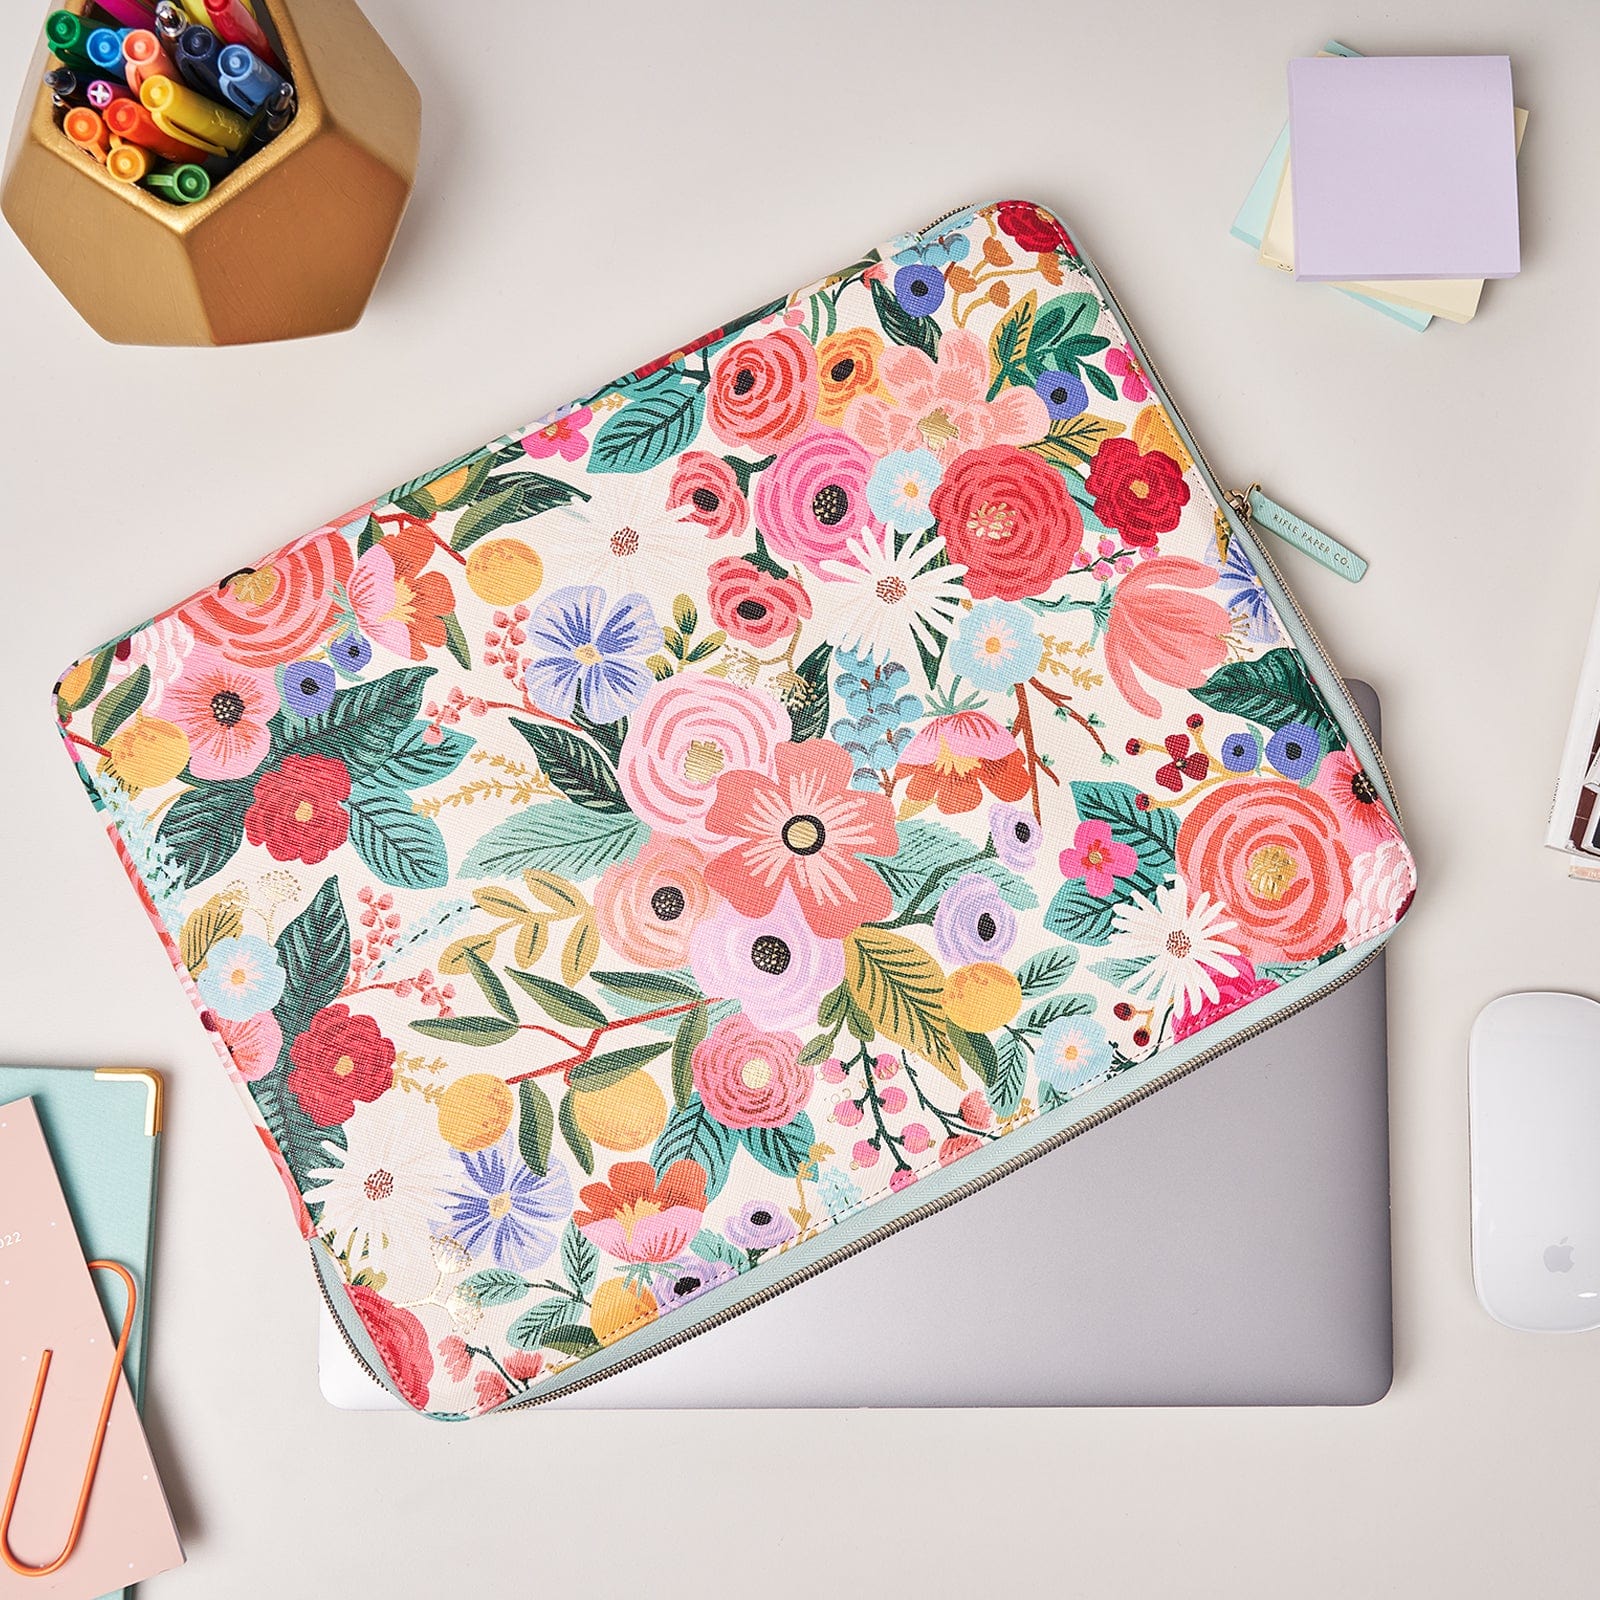 Rifle Paper Co. Laptop Sleeve 14” - Laptop Carrying Case with Padded  Exterior, Satin Interior, Metallic Zipper - Floral Laptop Bag For MacBook  Pro/Air